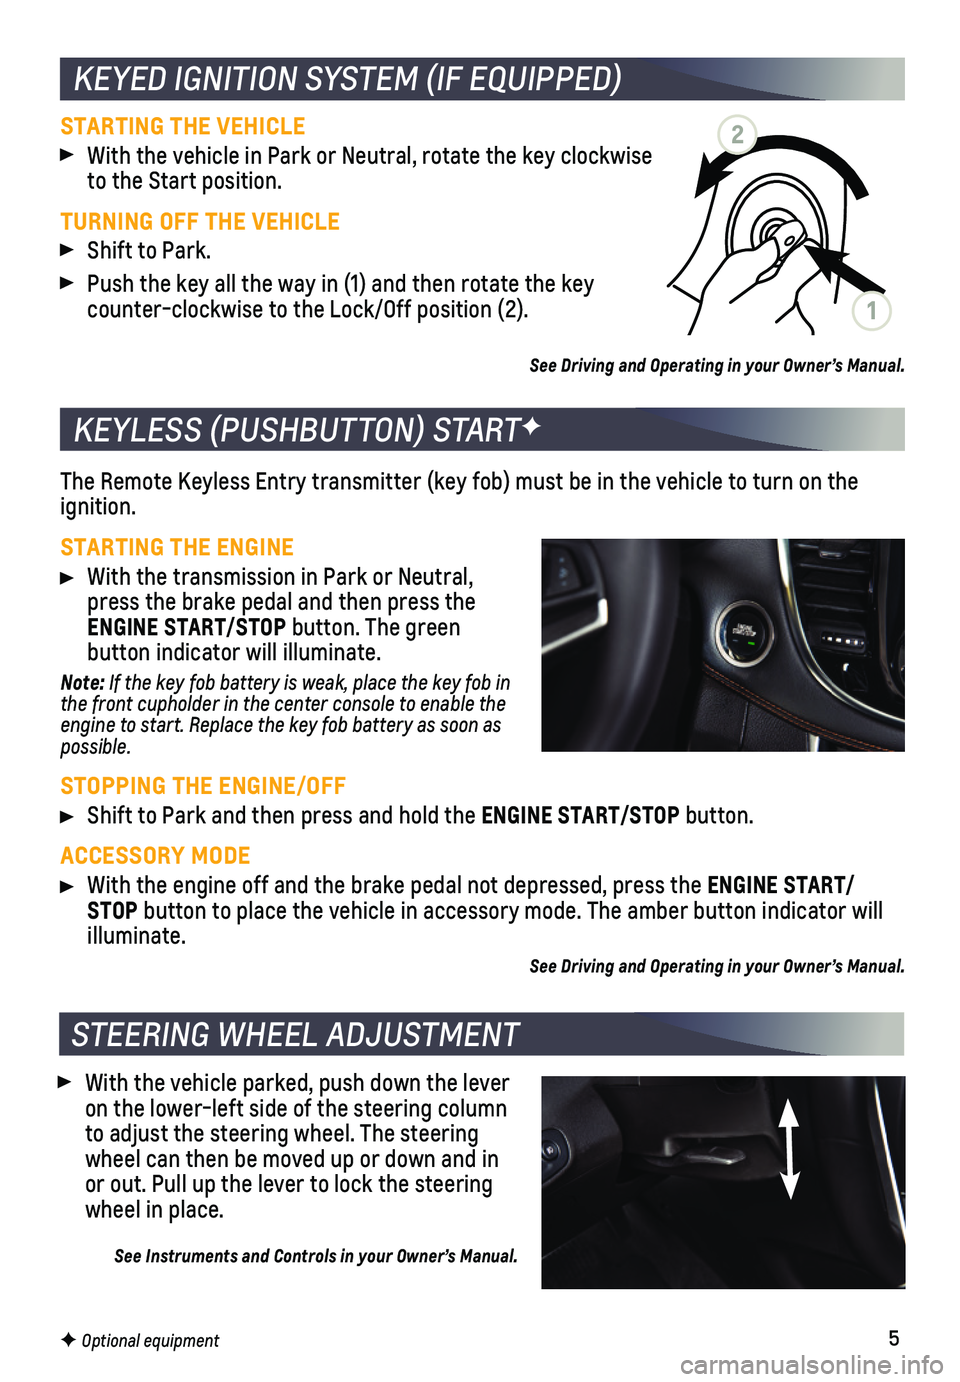 CHEVROLET TRAX 2021  Get To Know Guide 5
 With the vehicle parked, push down the lever on the lower-left side of the steering   column to adjust the steering wheel. The steering wheel can then be moved up or down and in or out. Pull up the